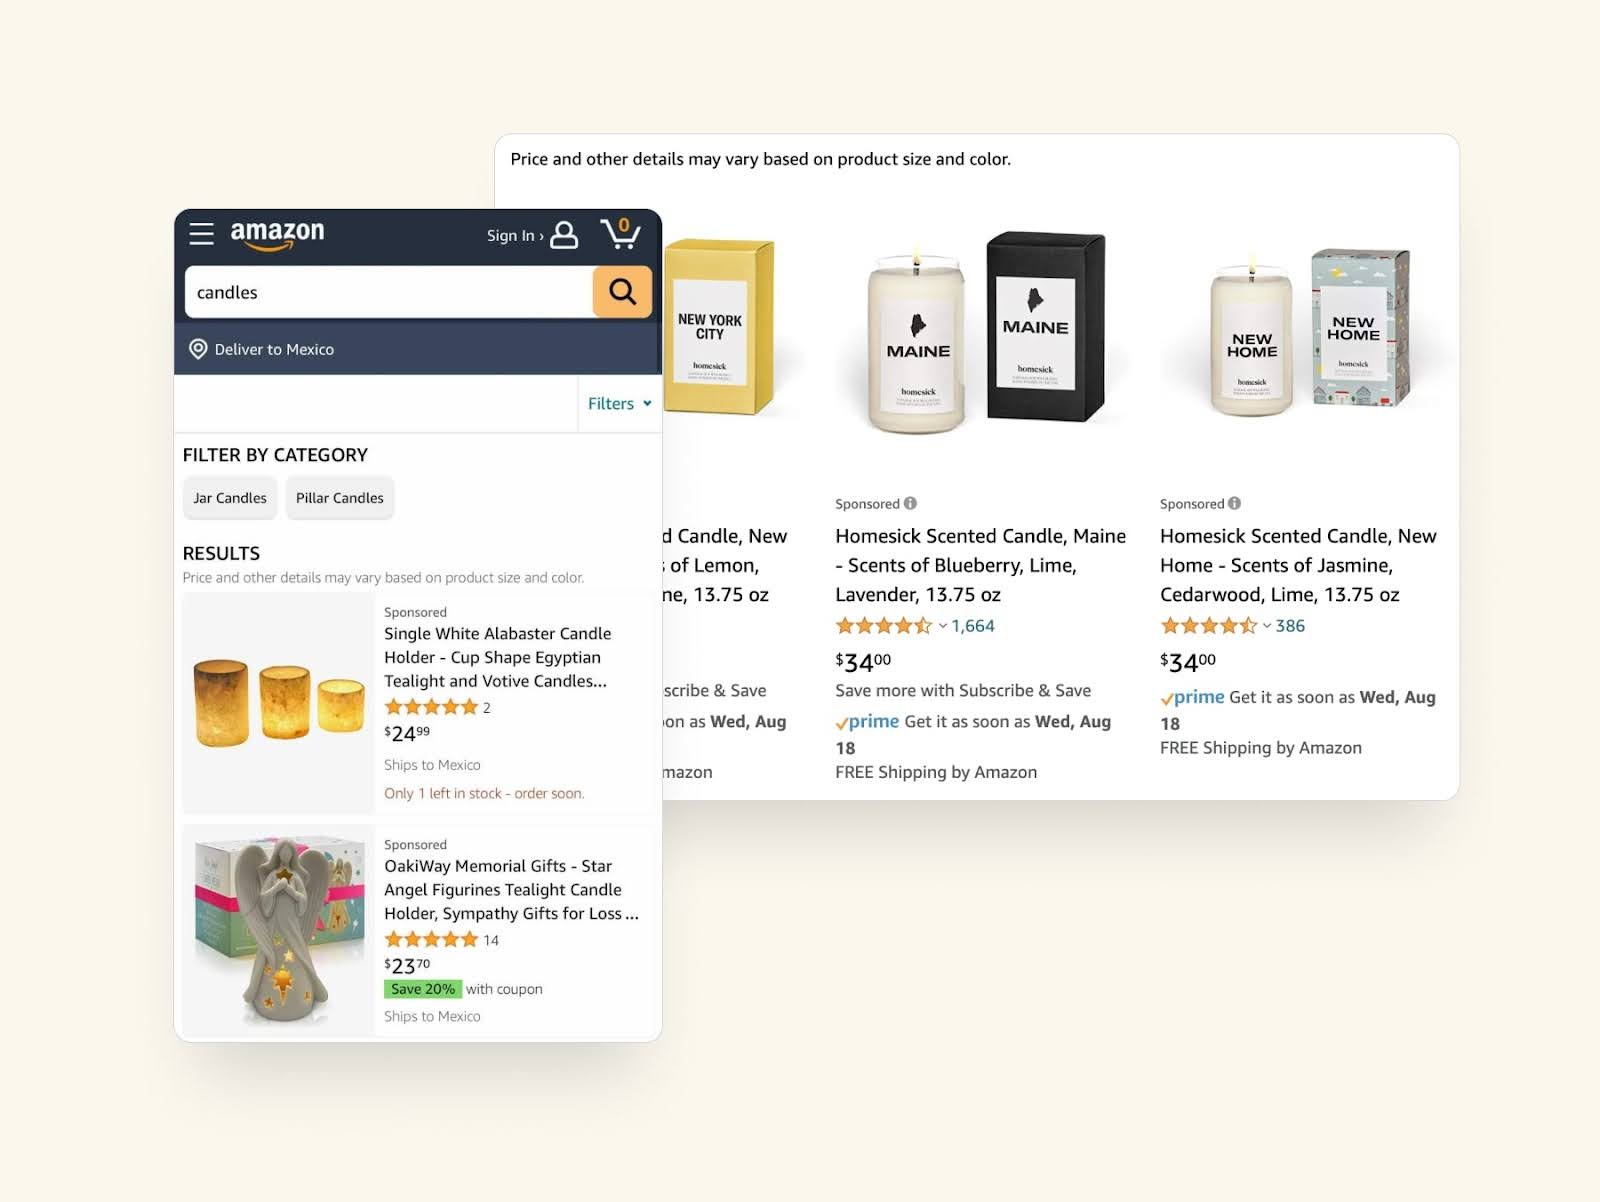 Screenshots of sponsored product ads on Amazon for Homesick Scented Candles within a search for candles.